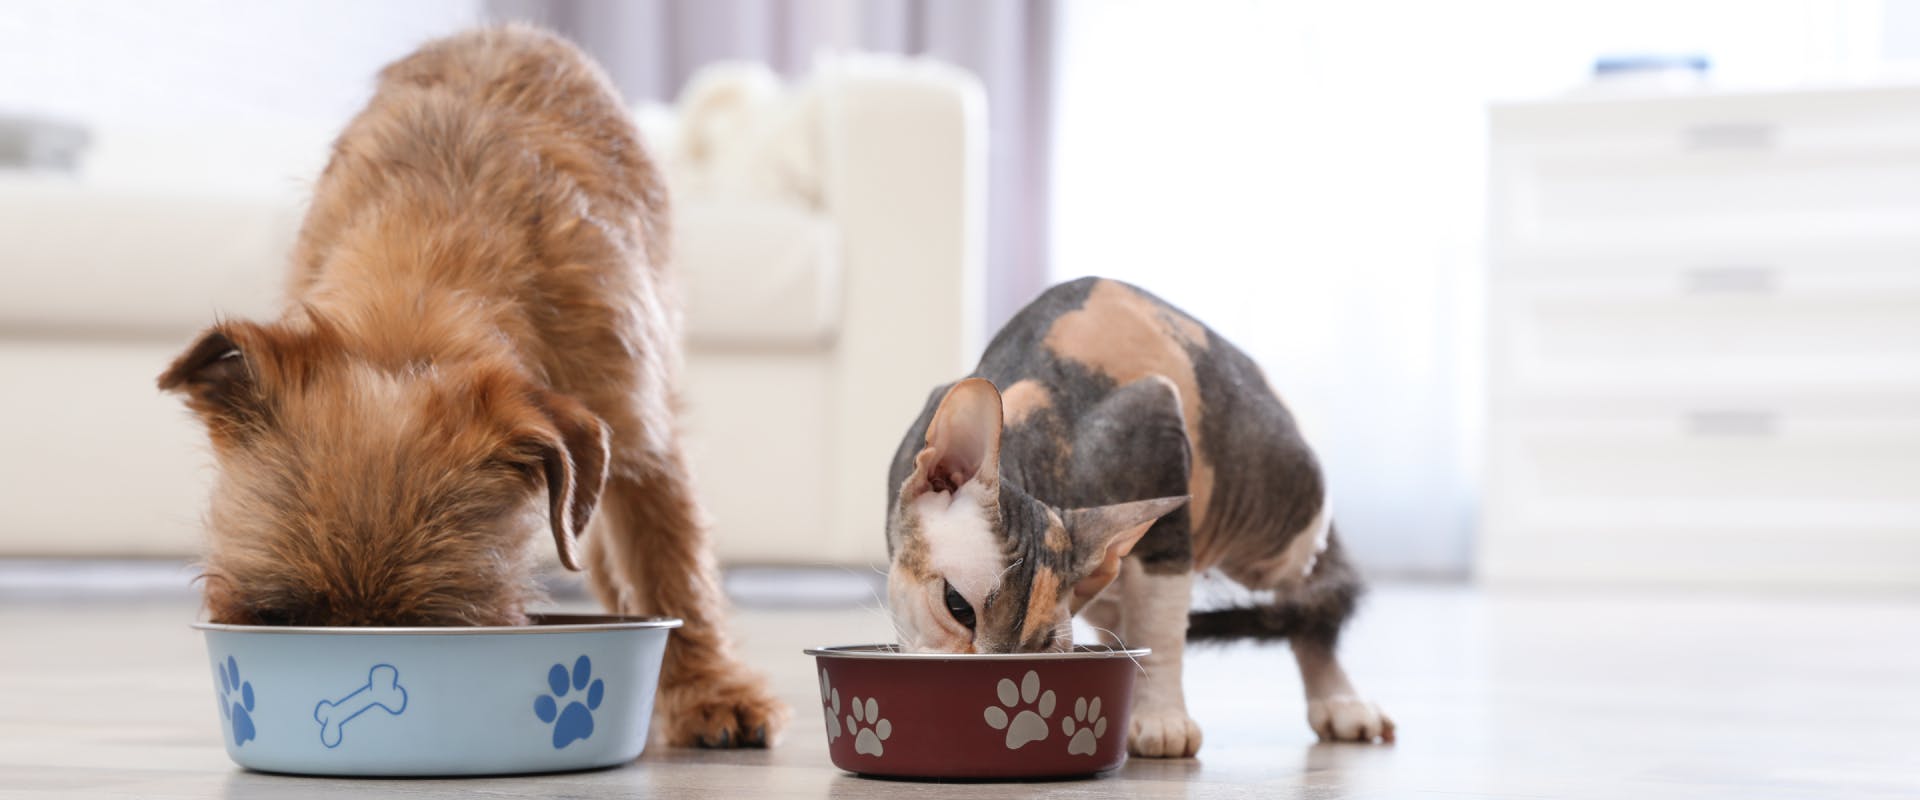 a terrier eating out of a blue dog bowl stood next to a tri-colored sphinx cat who is eating out of a red cat bowl.